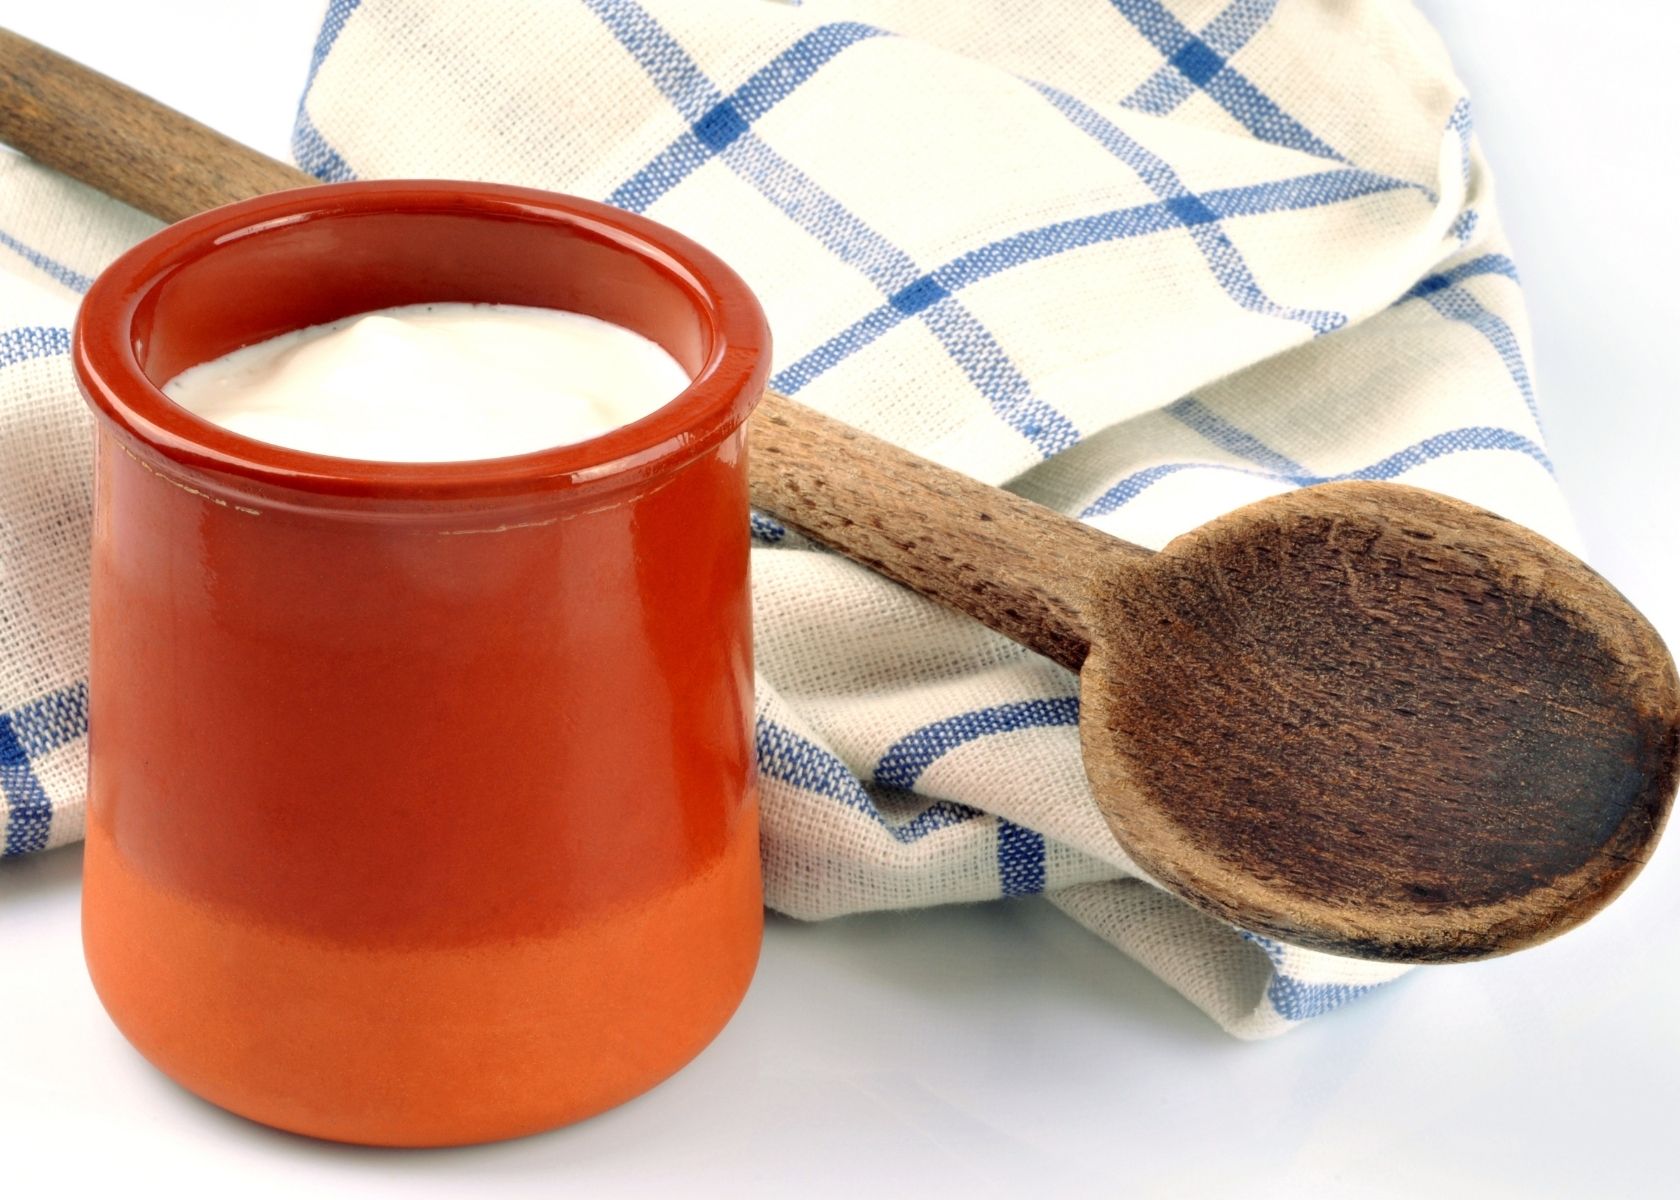 Creme Fraiche in clay mug next to wooden spoon and kitchen towel.